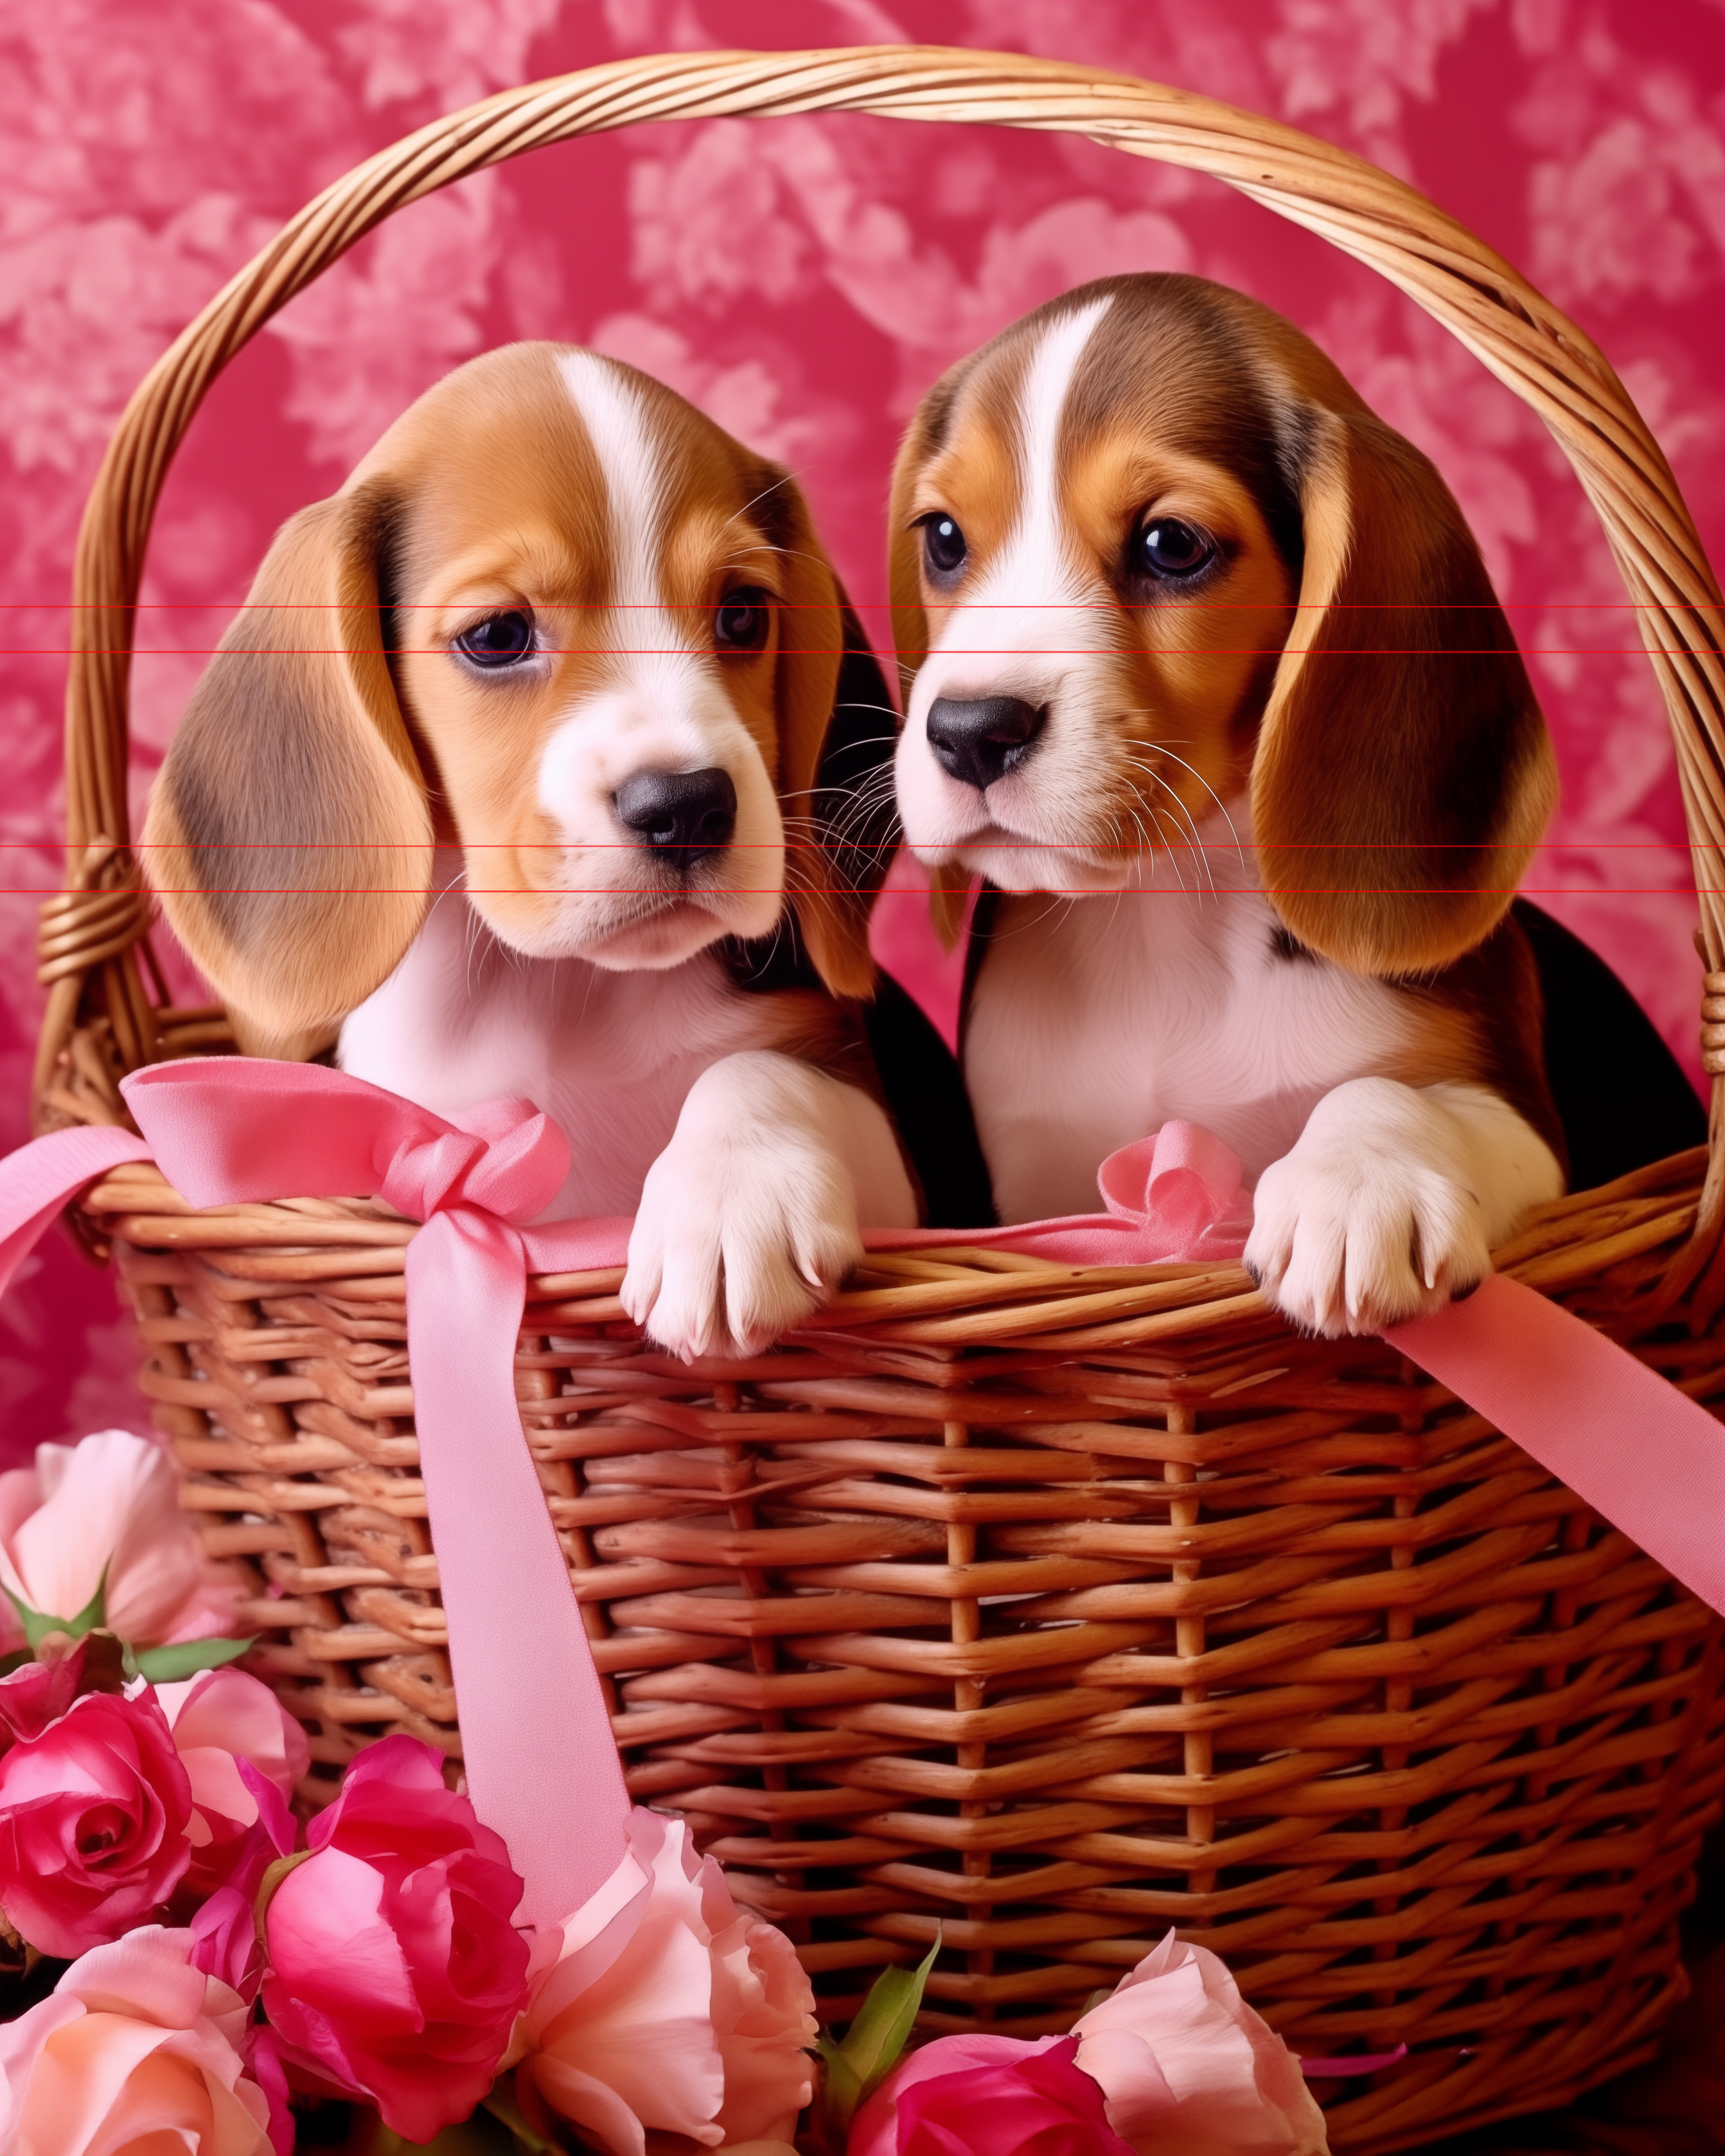 2 adorable beagle puppies in a wicker basket with pink ribbons and bows, pink floral wallpaper in back